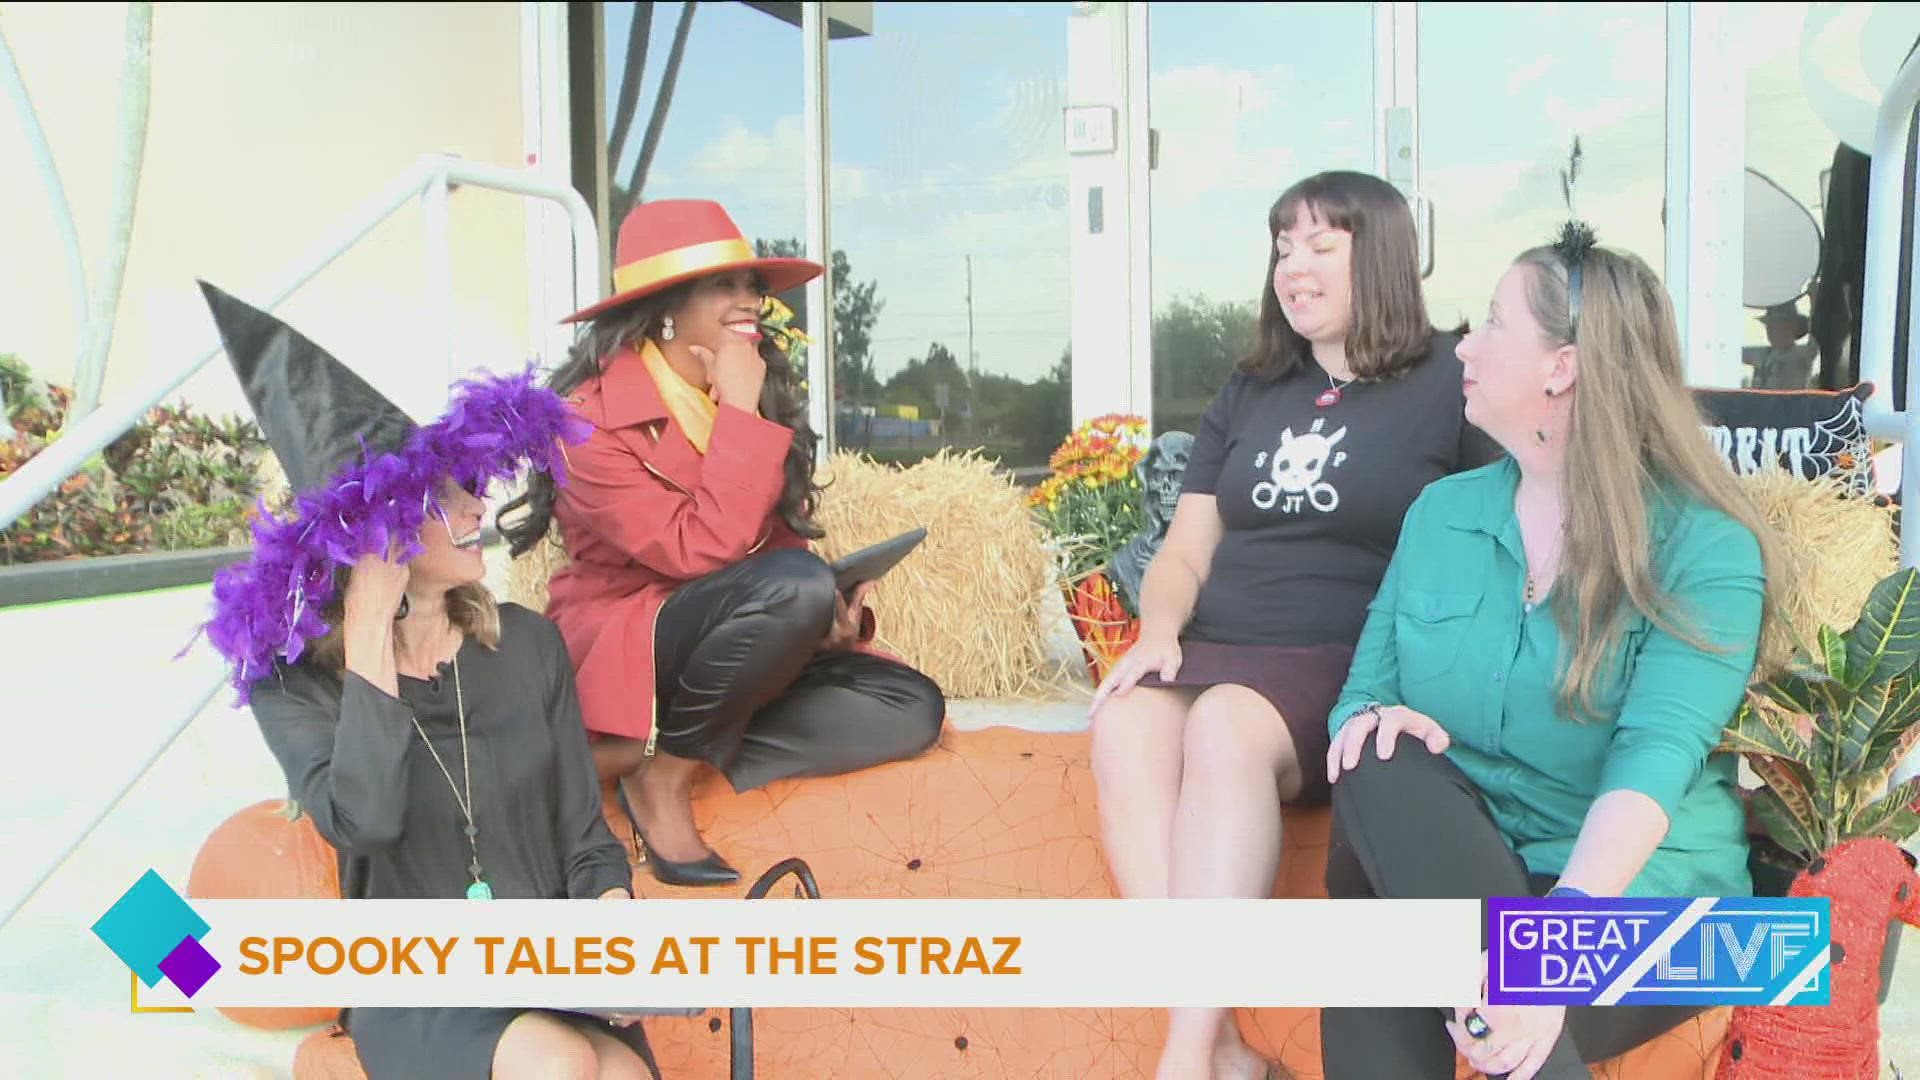 Spooky tales at the Straz